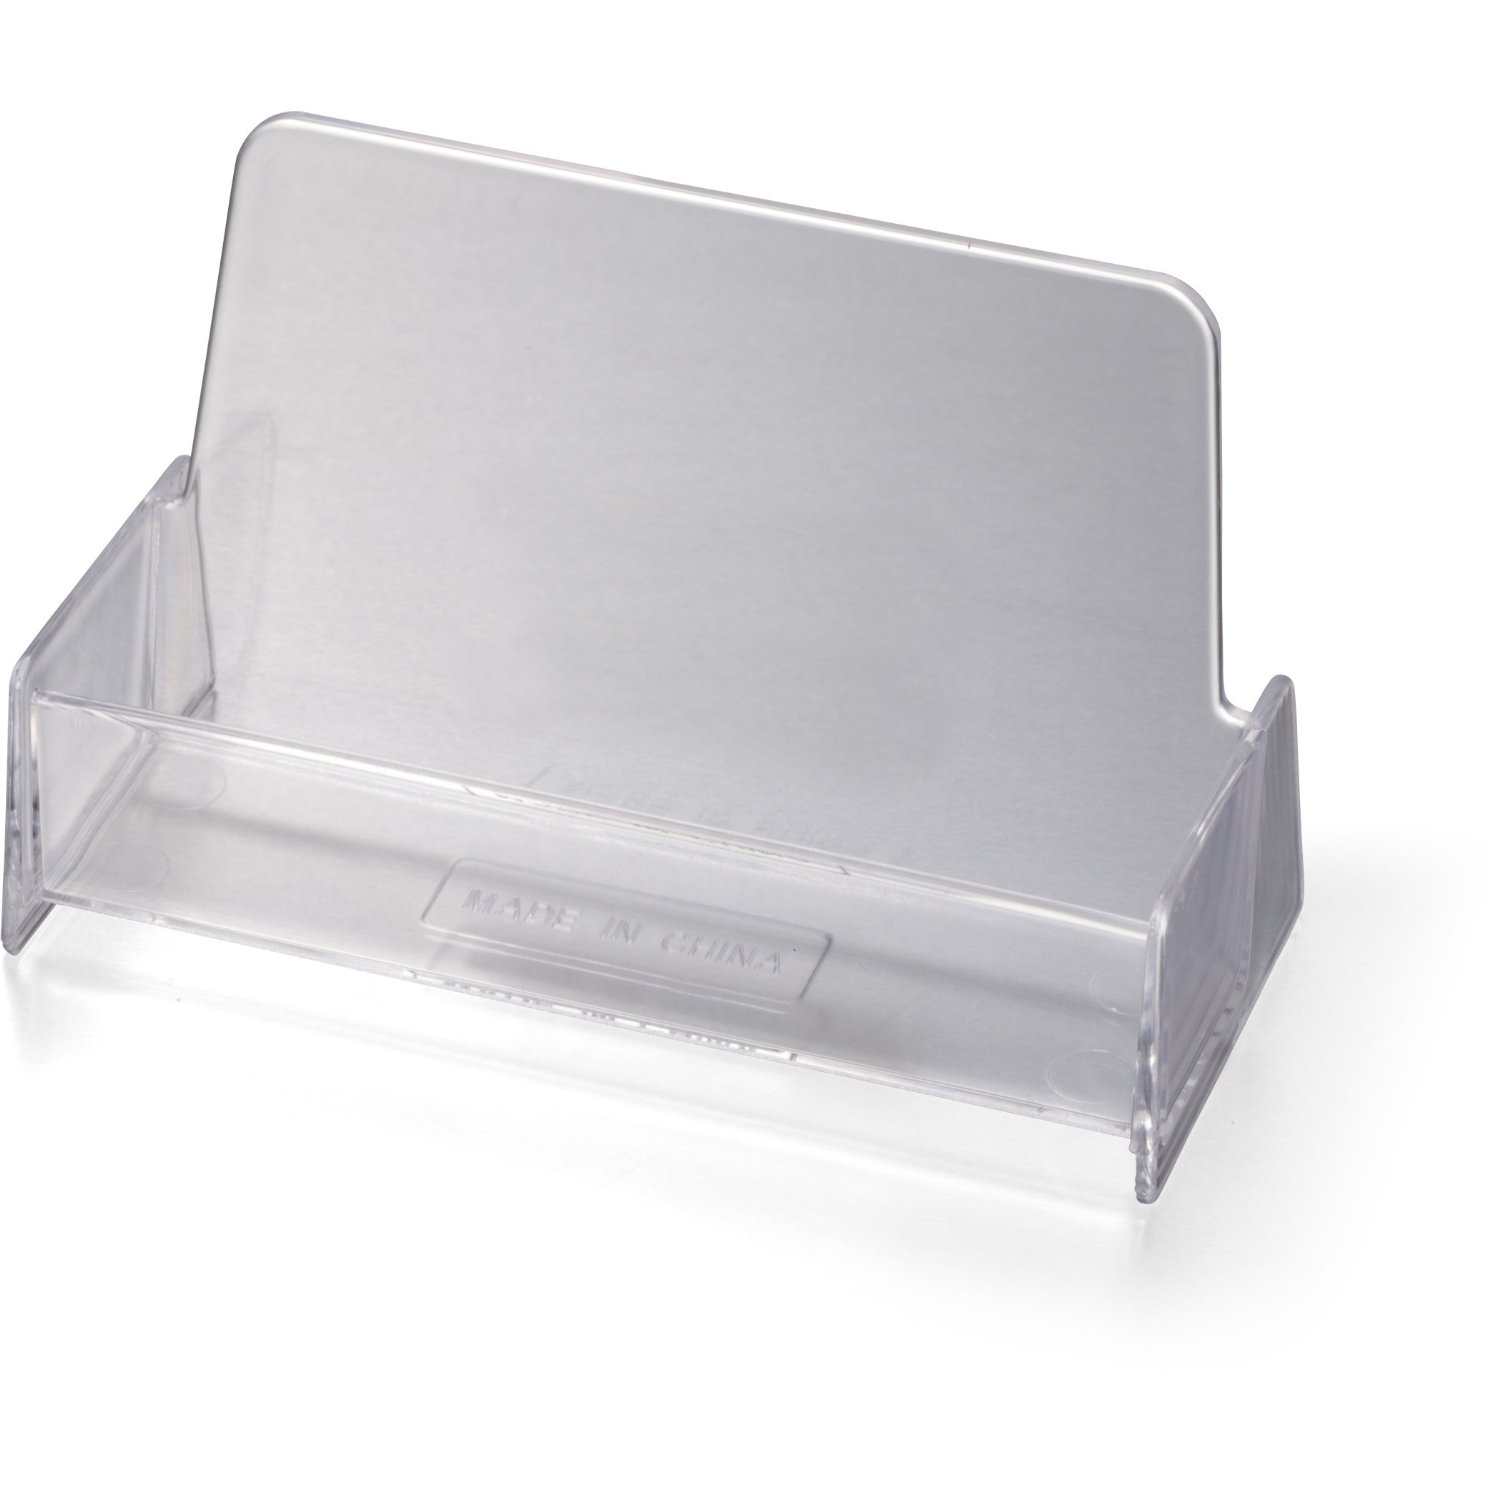 Business card holder holds approximately 50 cards.